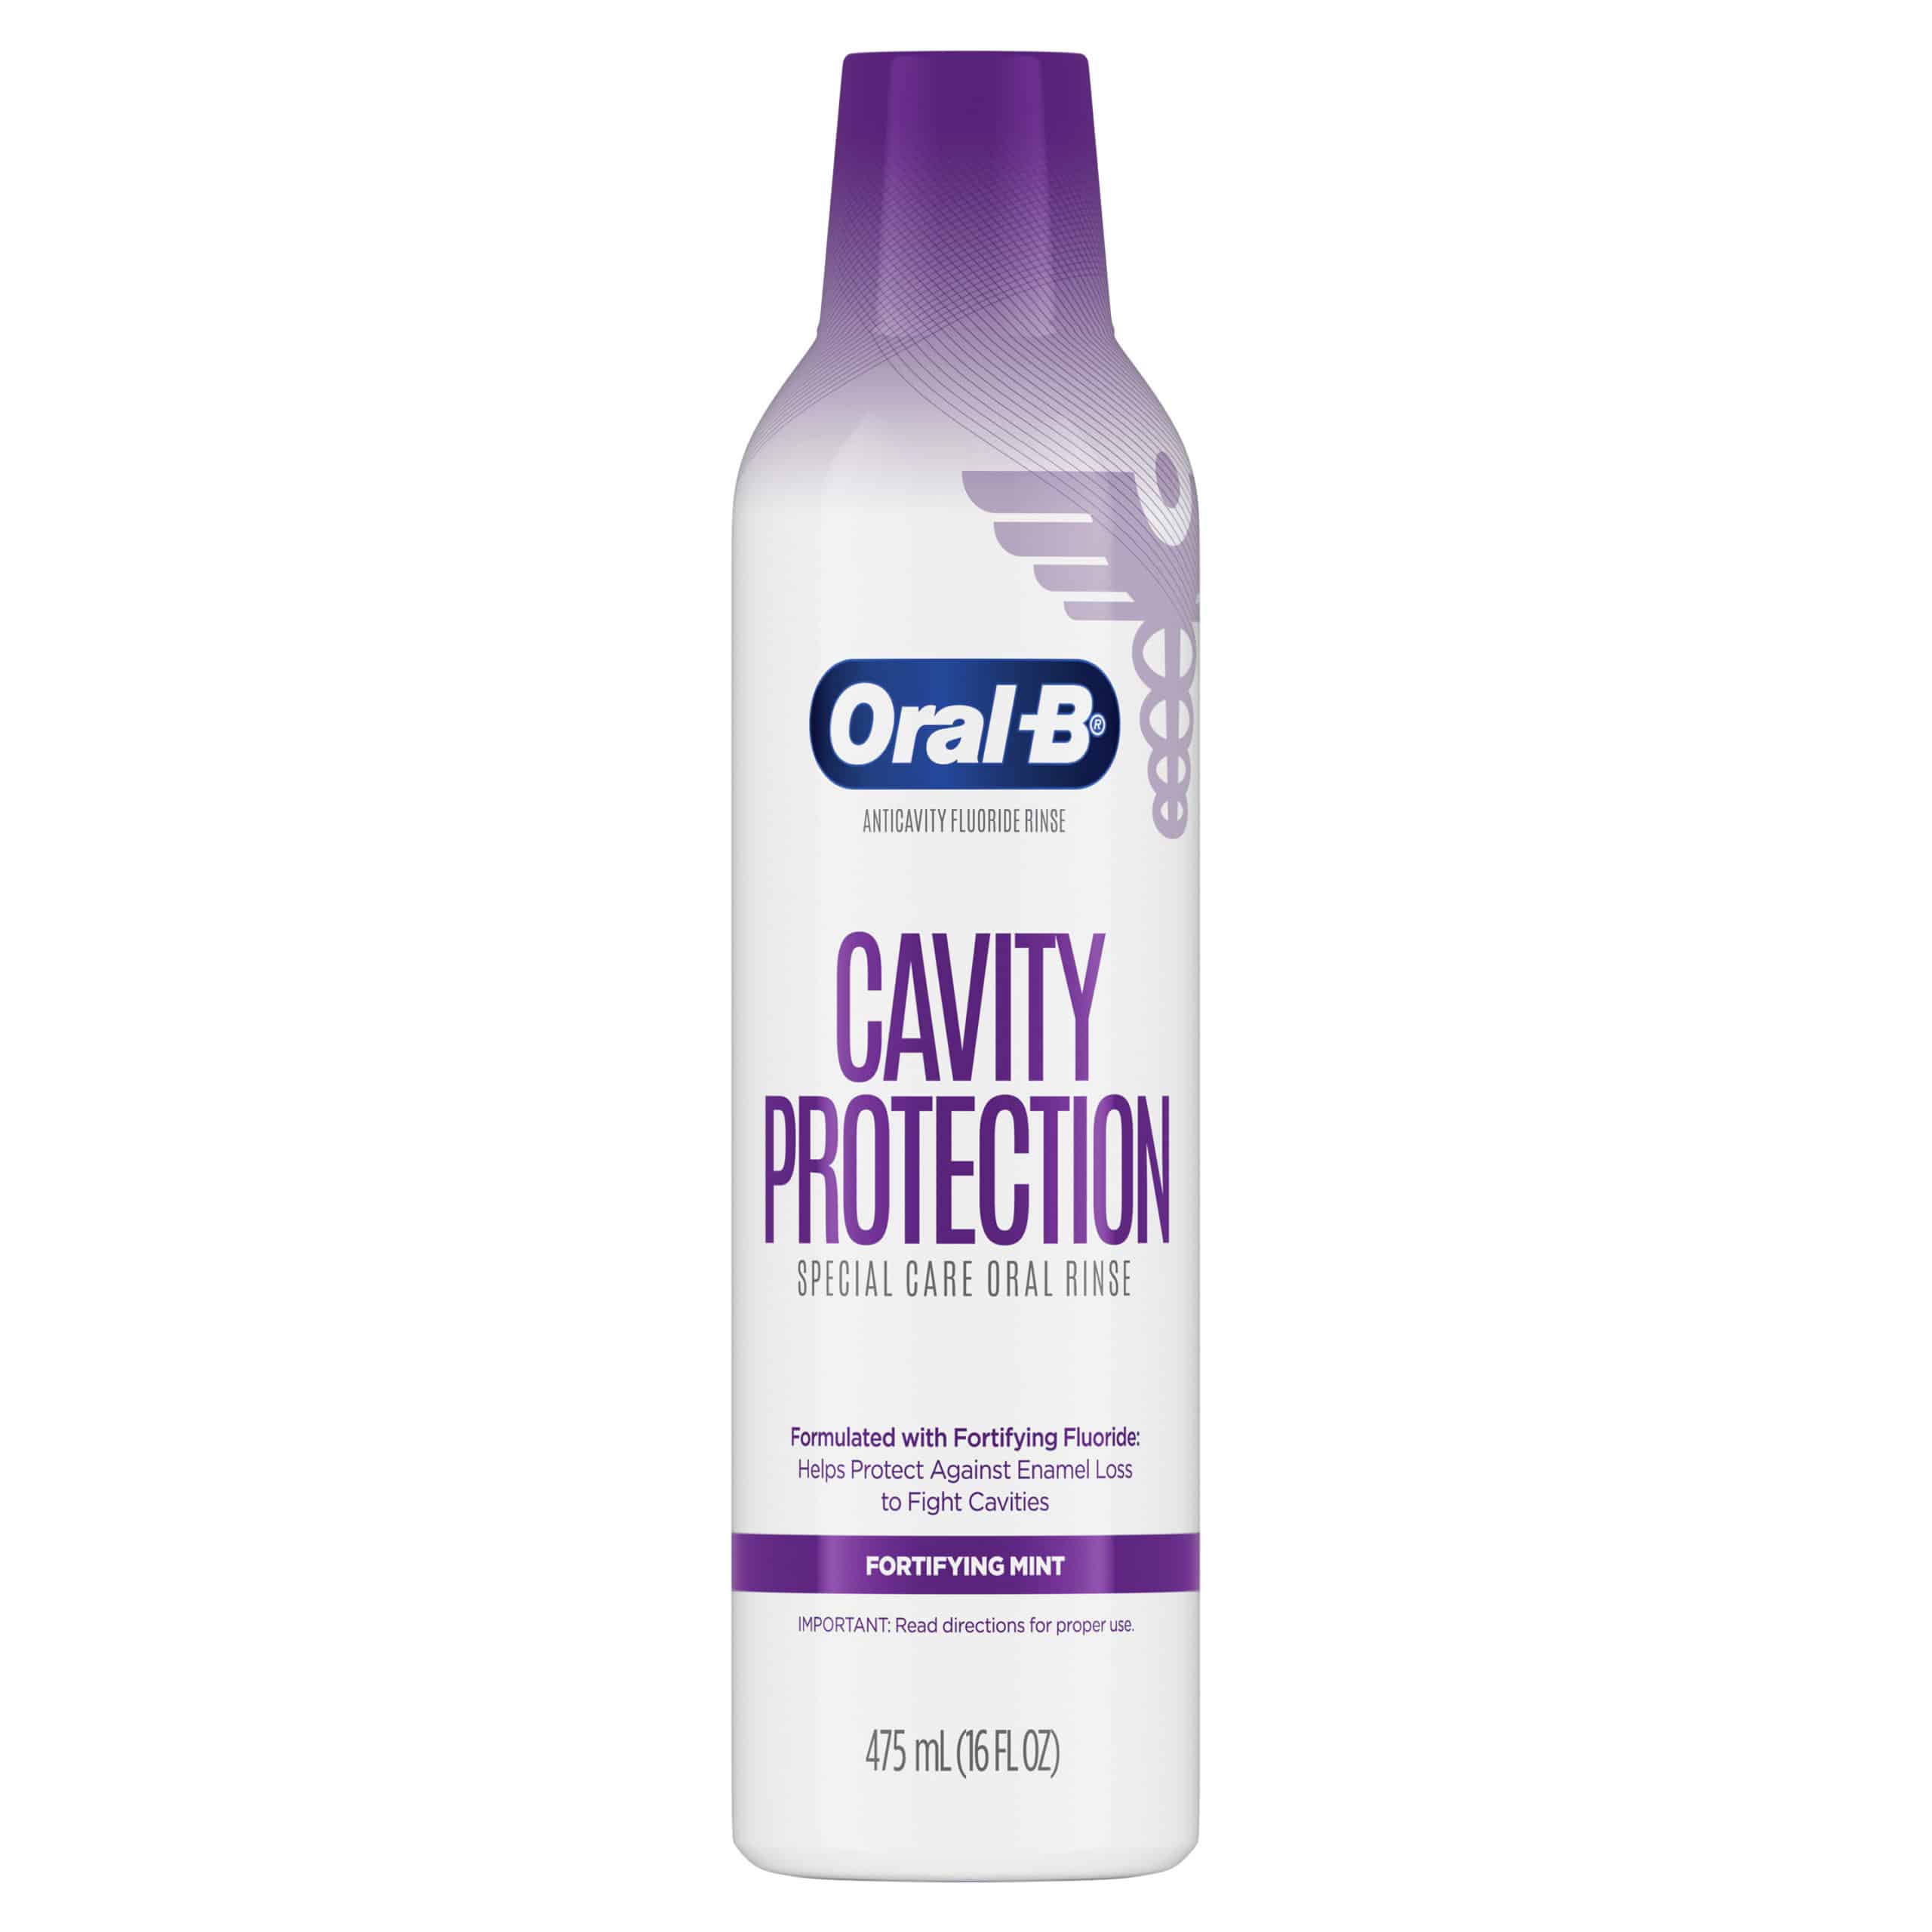 Oral-B Cavity Protection Special Care Oral Rinse 475mL (16 fl oz)